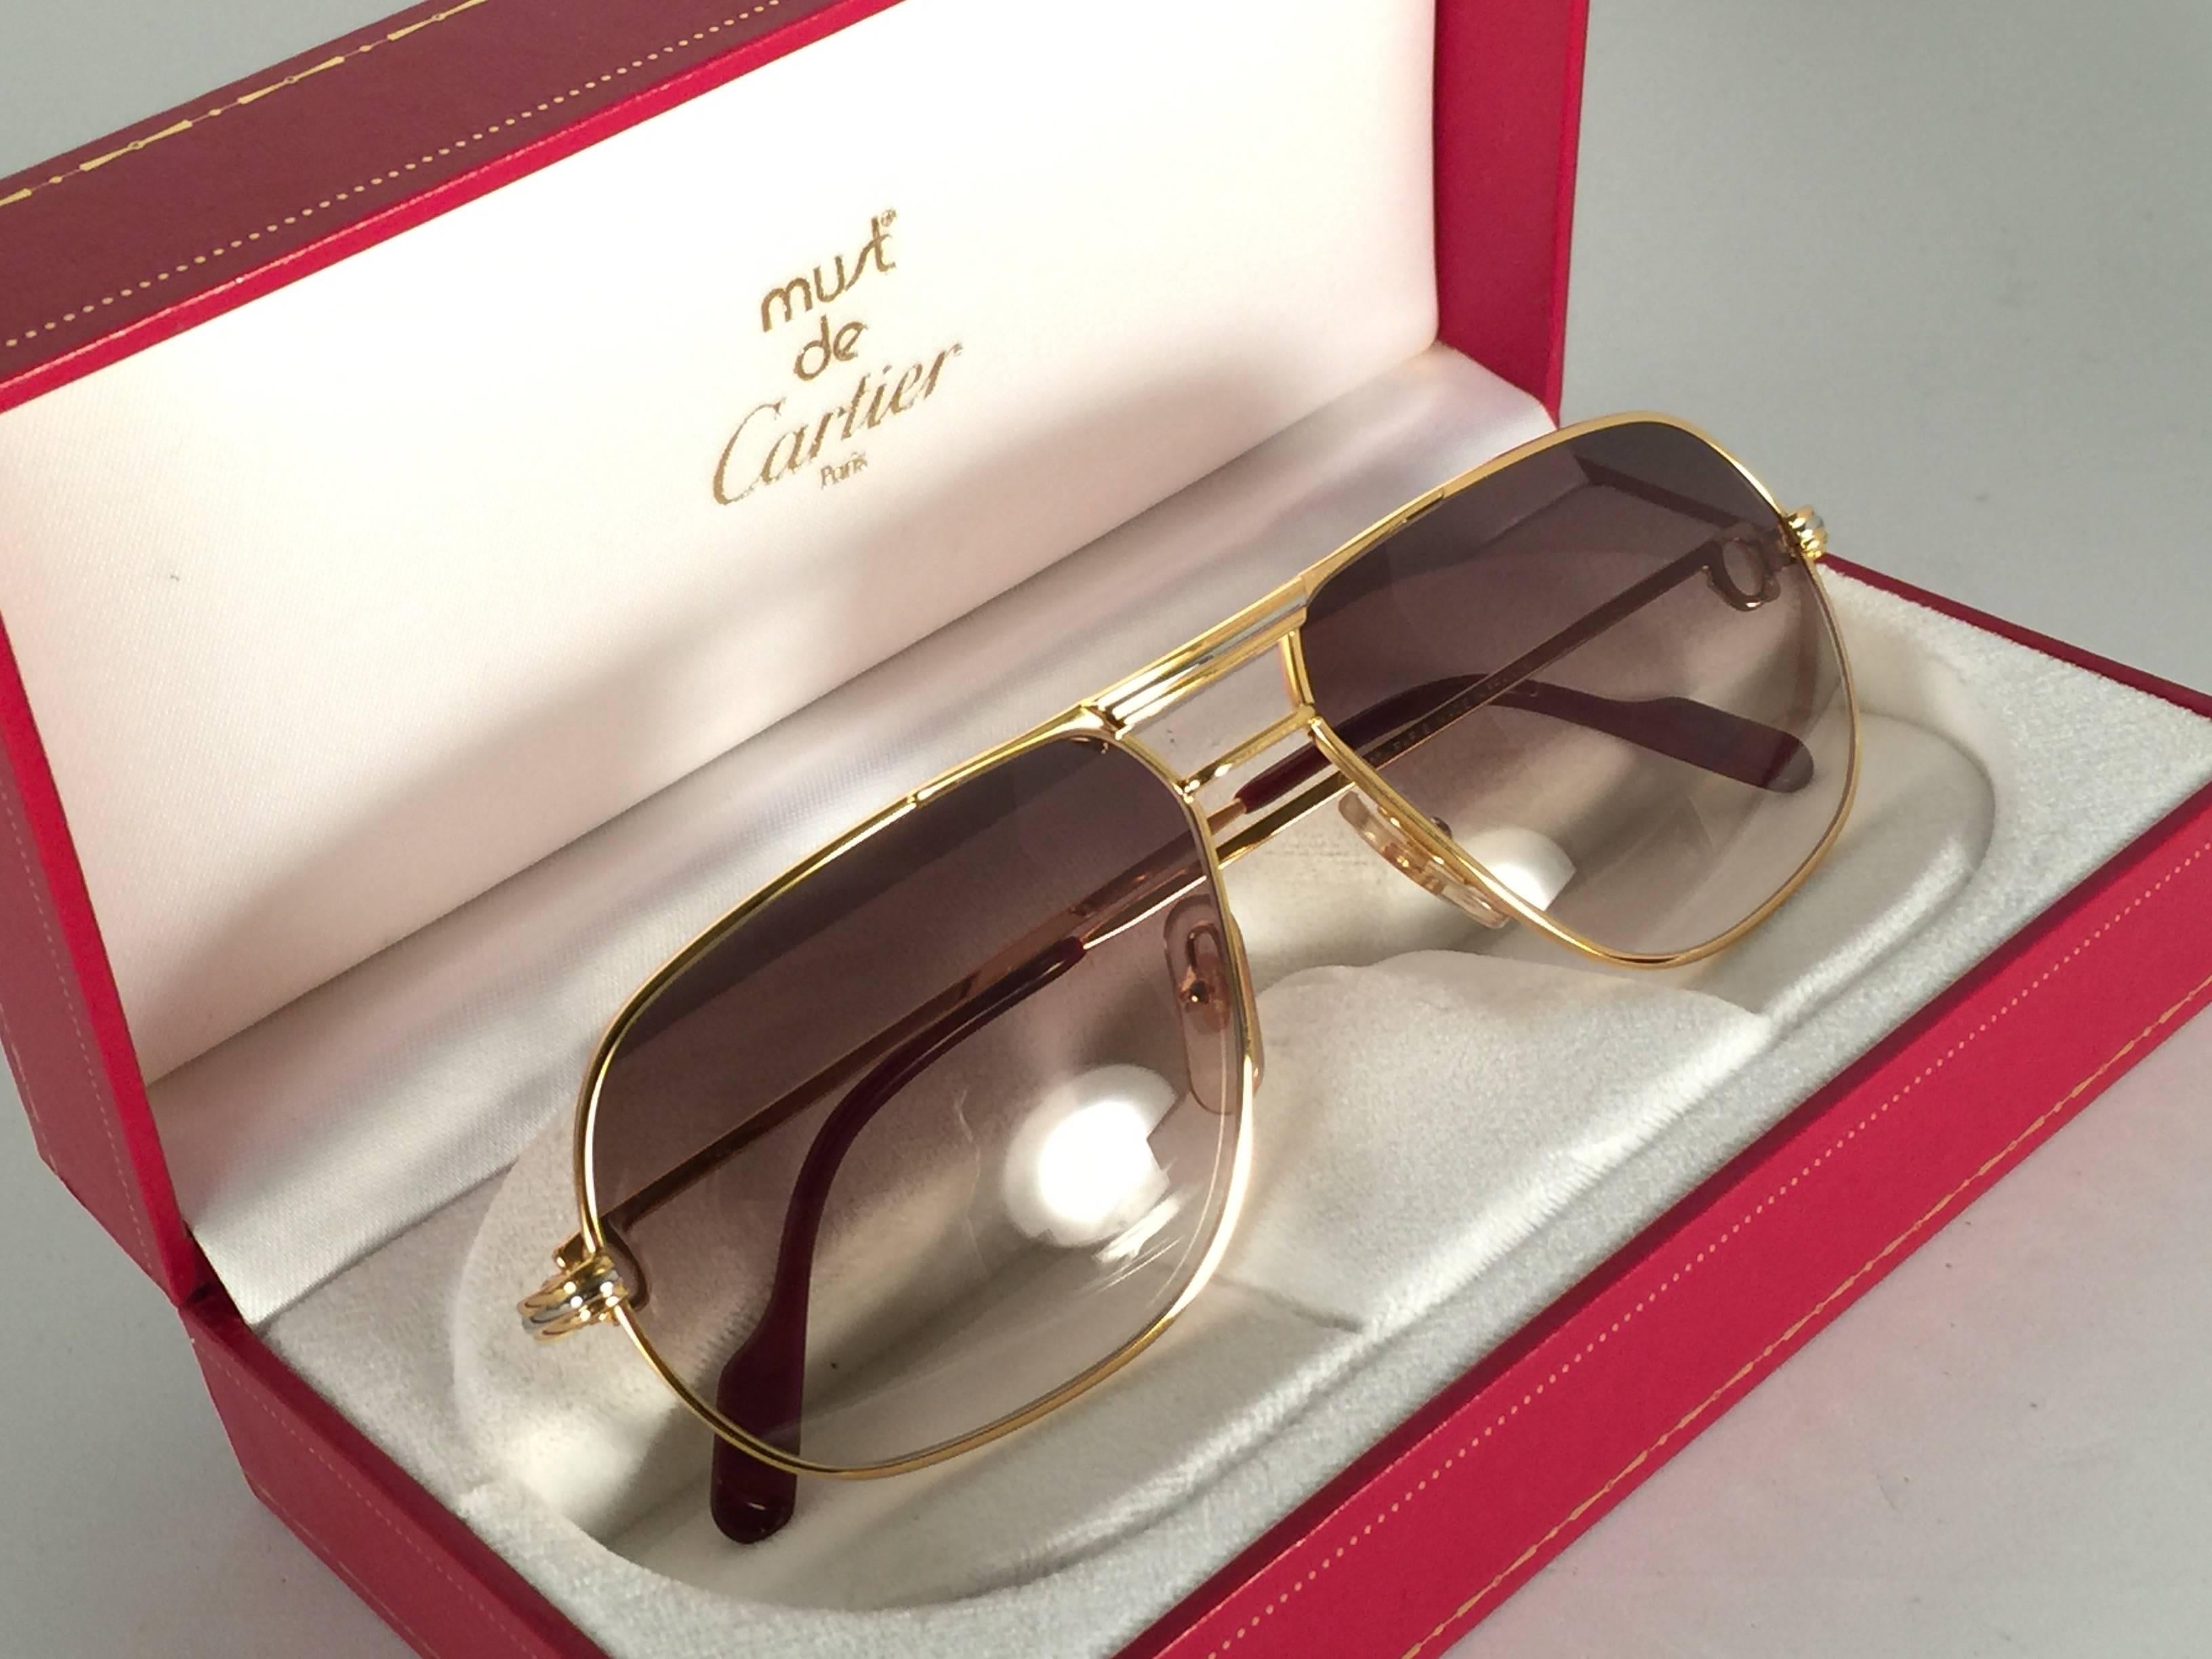 New 1988 Cartier Aviator Tank sunglasses with new honey gradient (uv protection) lenses.
Frame is with the front and sides in yellow and white gold. 
All hallmarks. Enamel with Cartier gold signs on the earpaddles. So classy, both arms sport the C